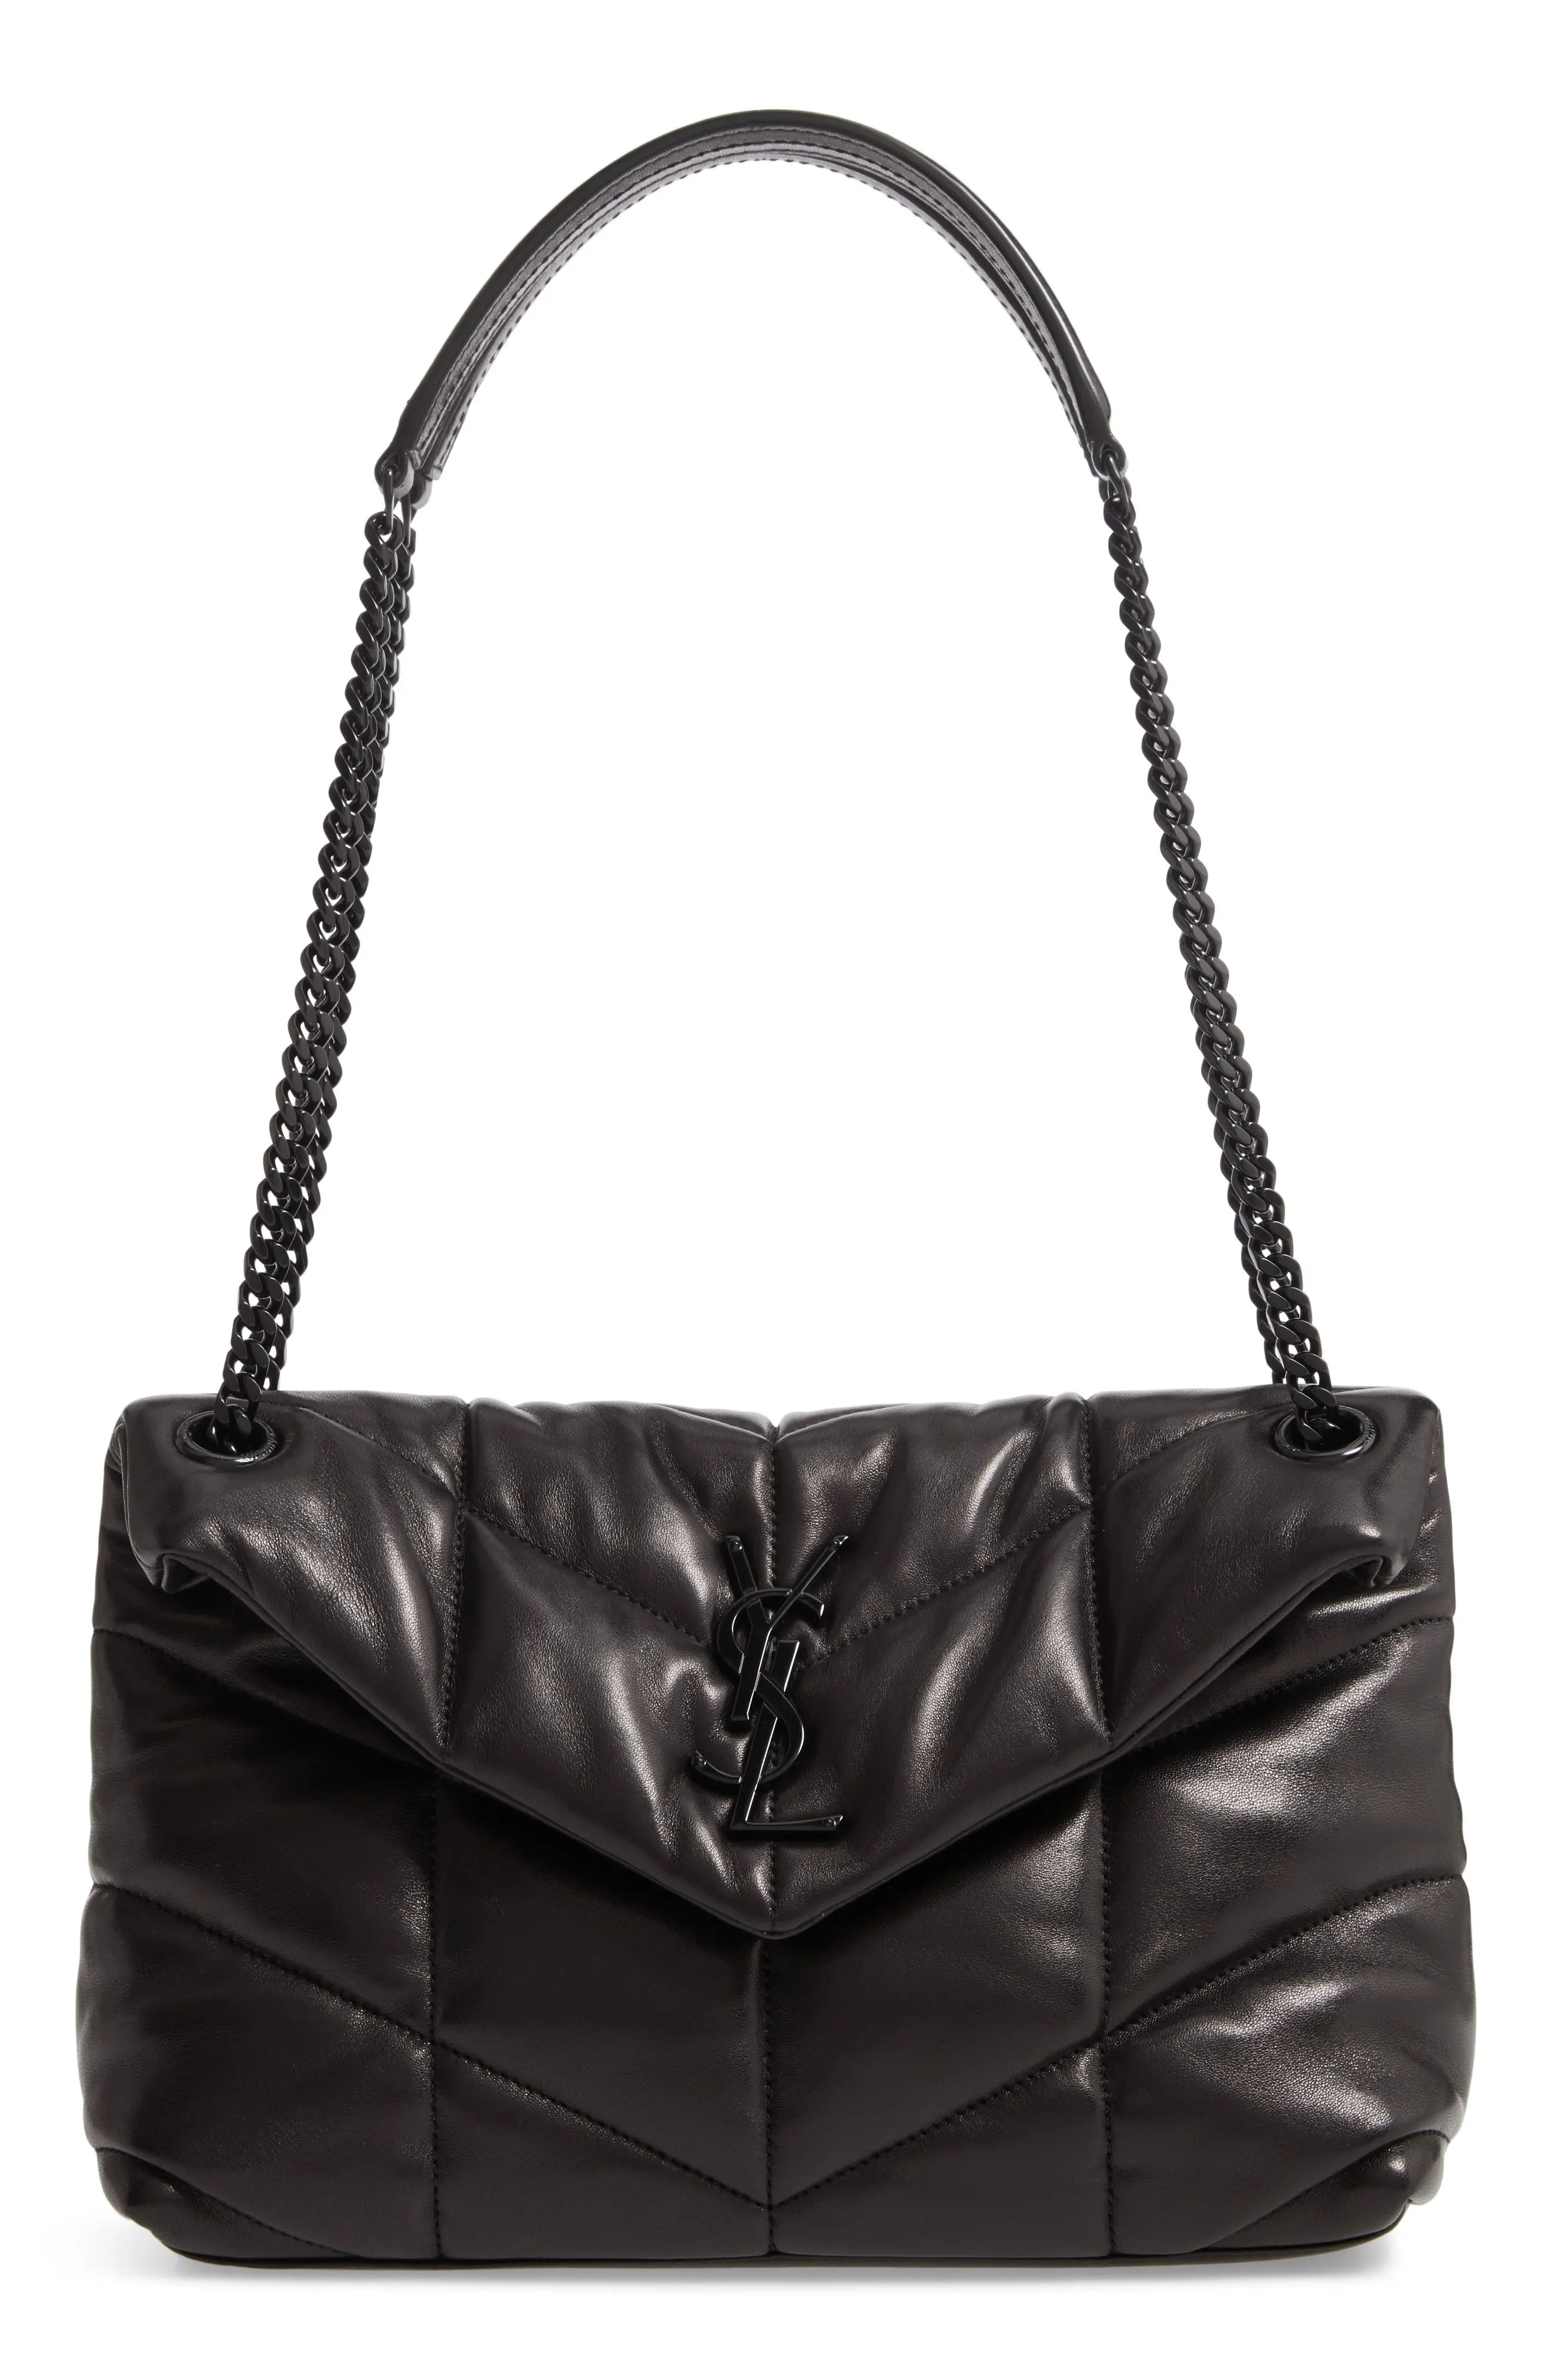 Saint Laurent Small Loulou Leather Puffer Bag - Black | Nordstrom